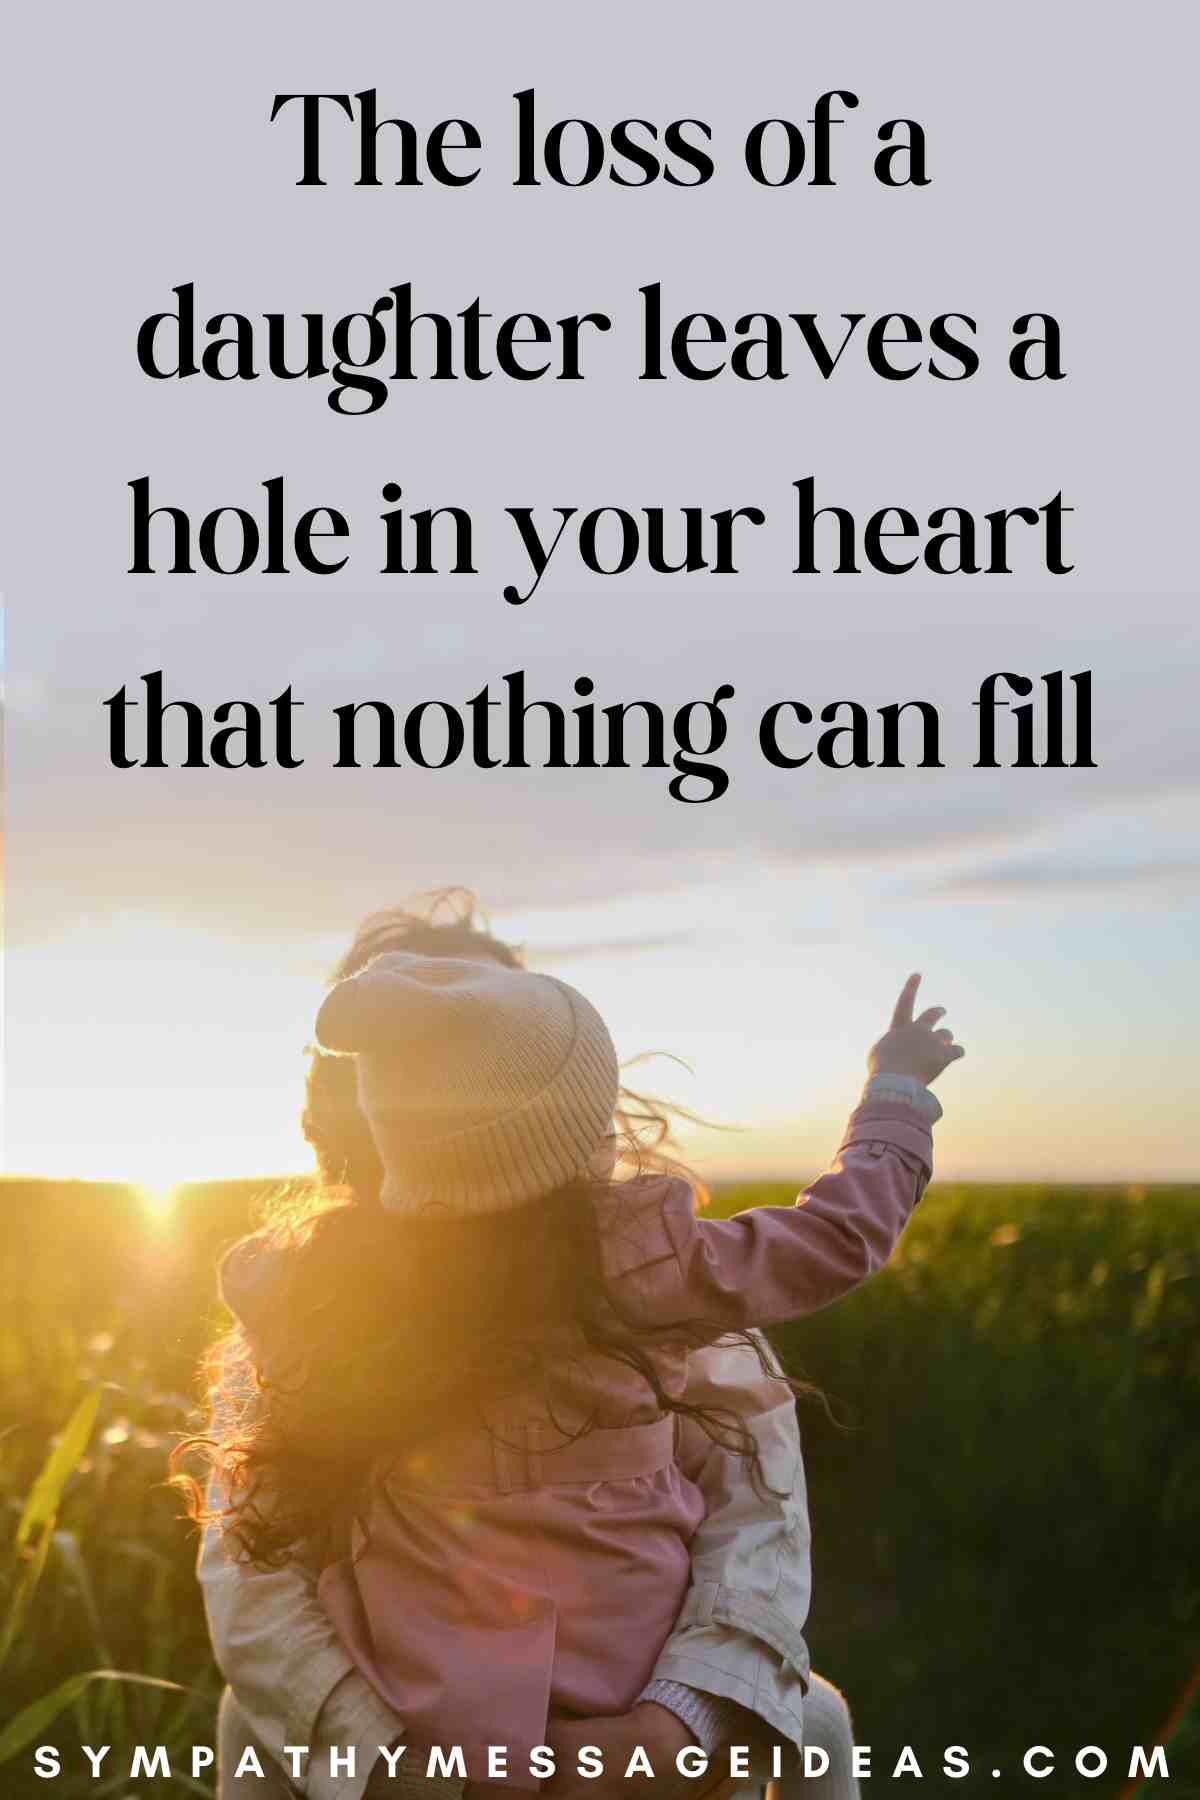 sad quote about loss of daughter